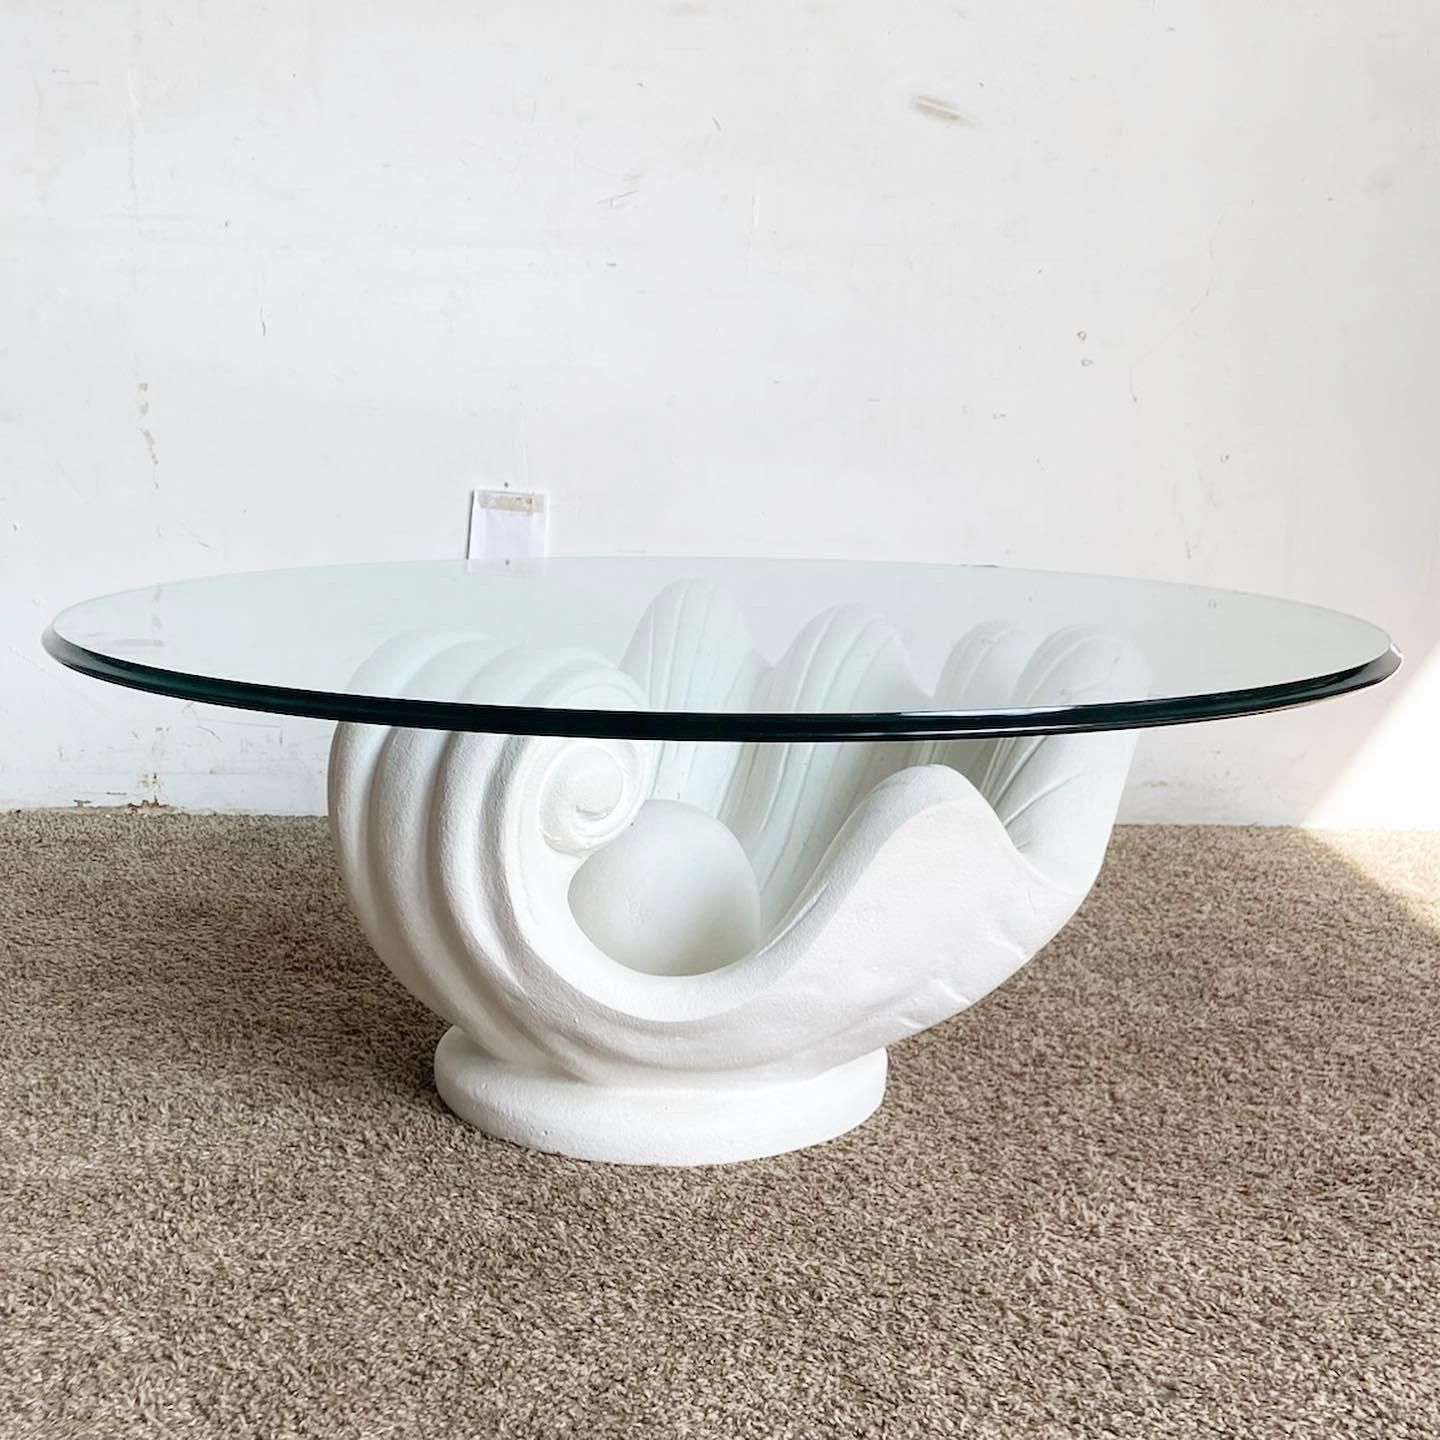 Introducing the Regency Modern White Plaster Clam Shell Glass Top Coffee Table. This piece seamlessly blends timeless elegance with coastal charm. With its white plaster base shaped like a clam shell and a transparent glass top, it's both functional